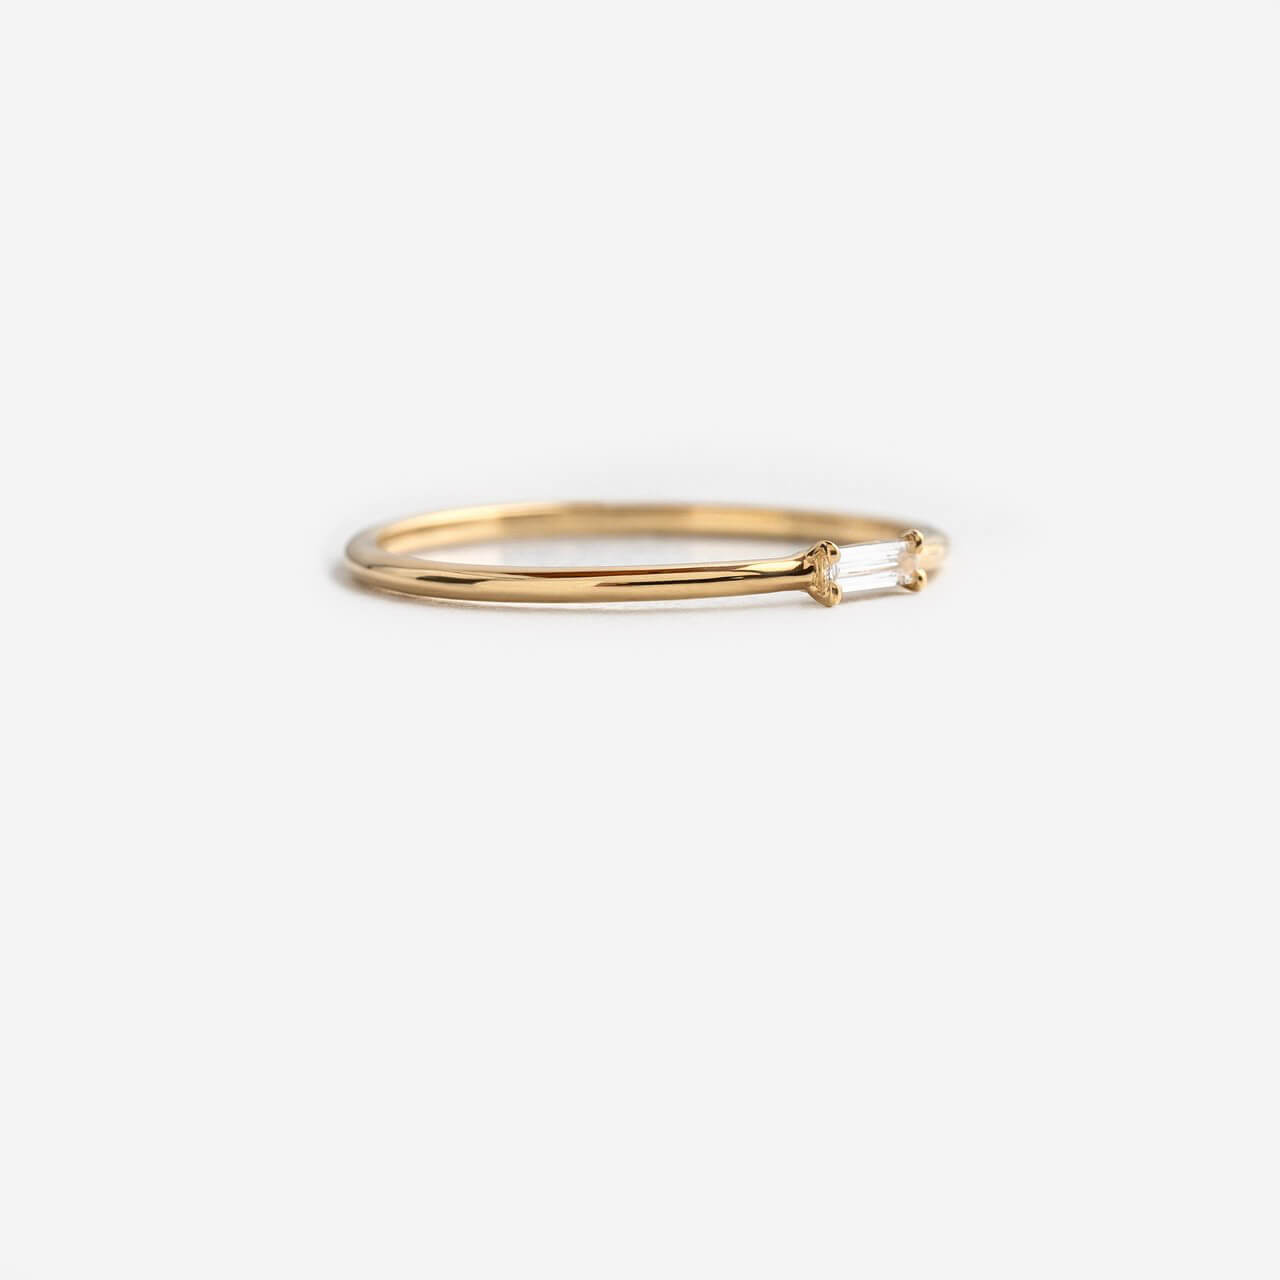 Morse Code Ring, Yellow Gold - Letter 